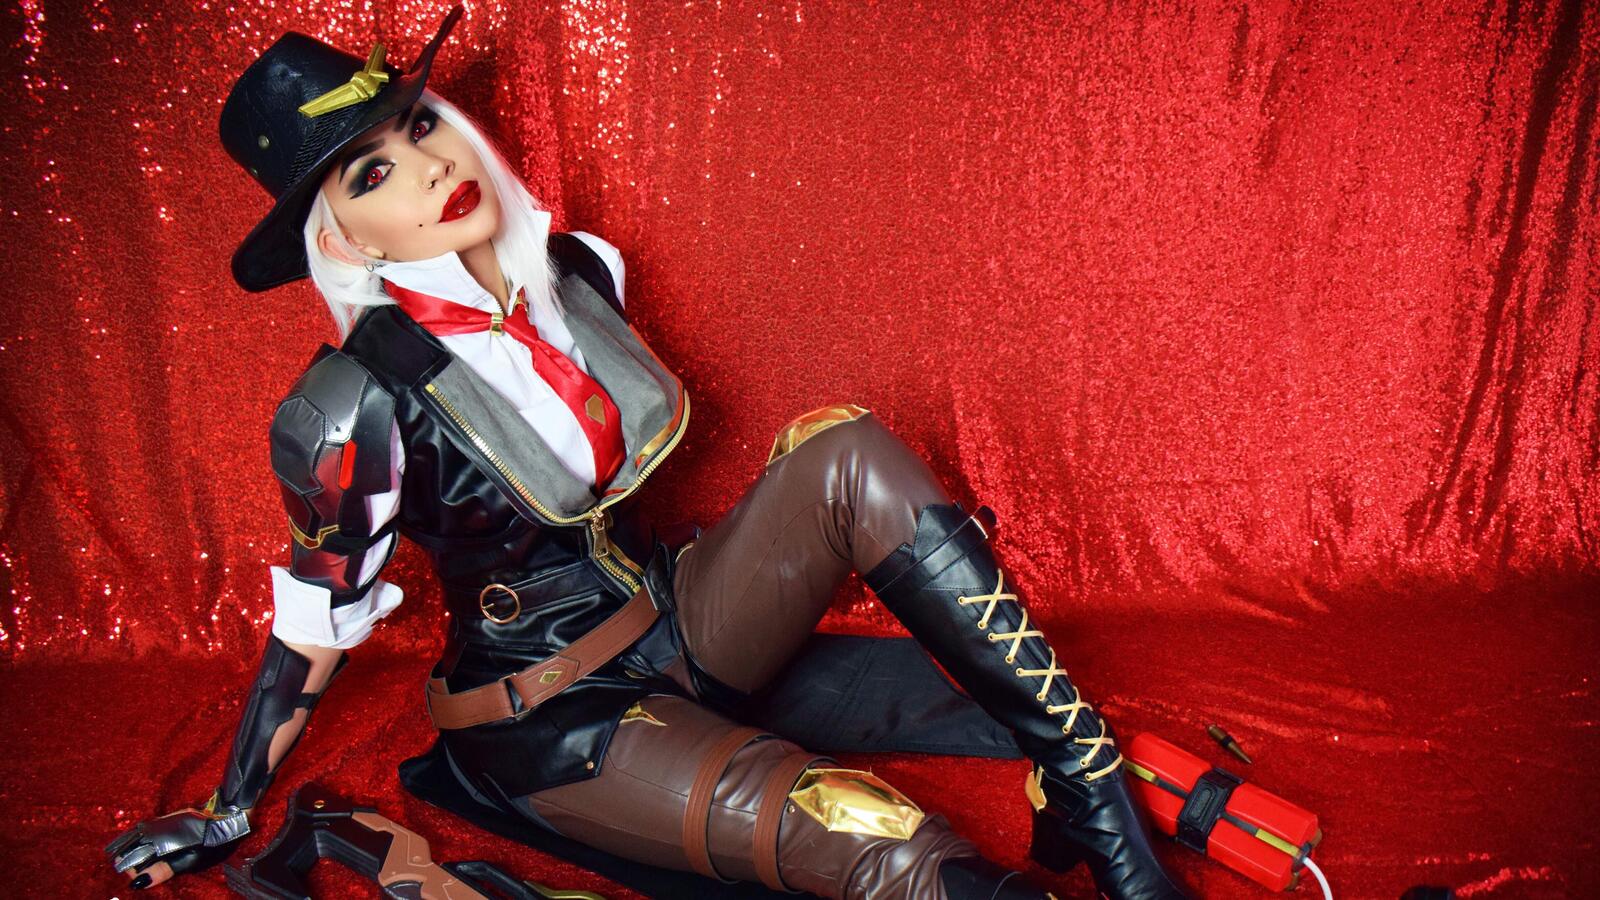 Wallpapers cosplay busty latex on the desktop